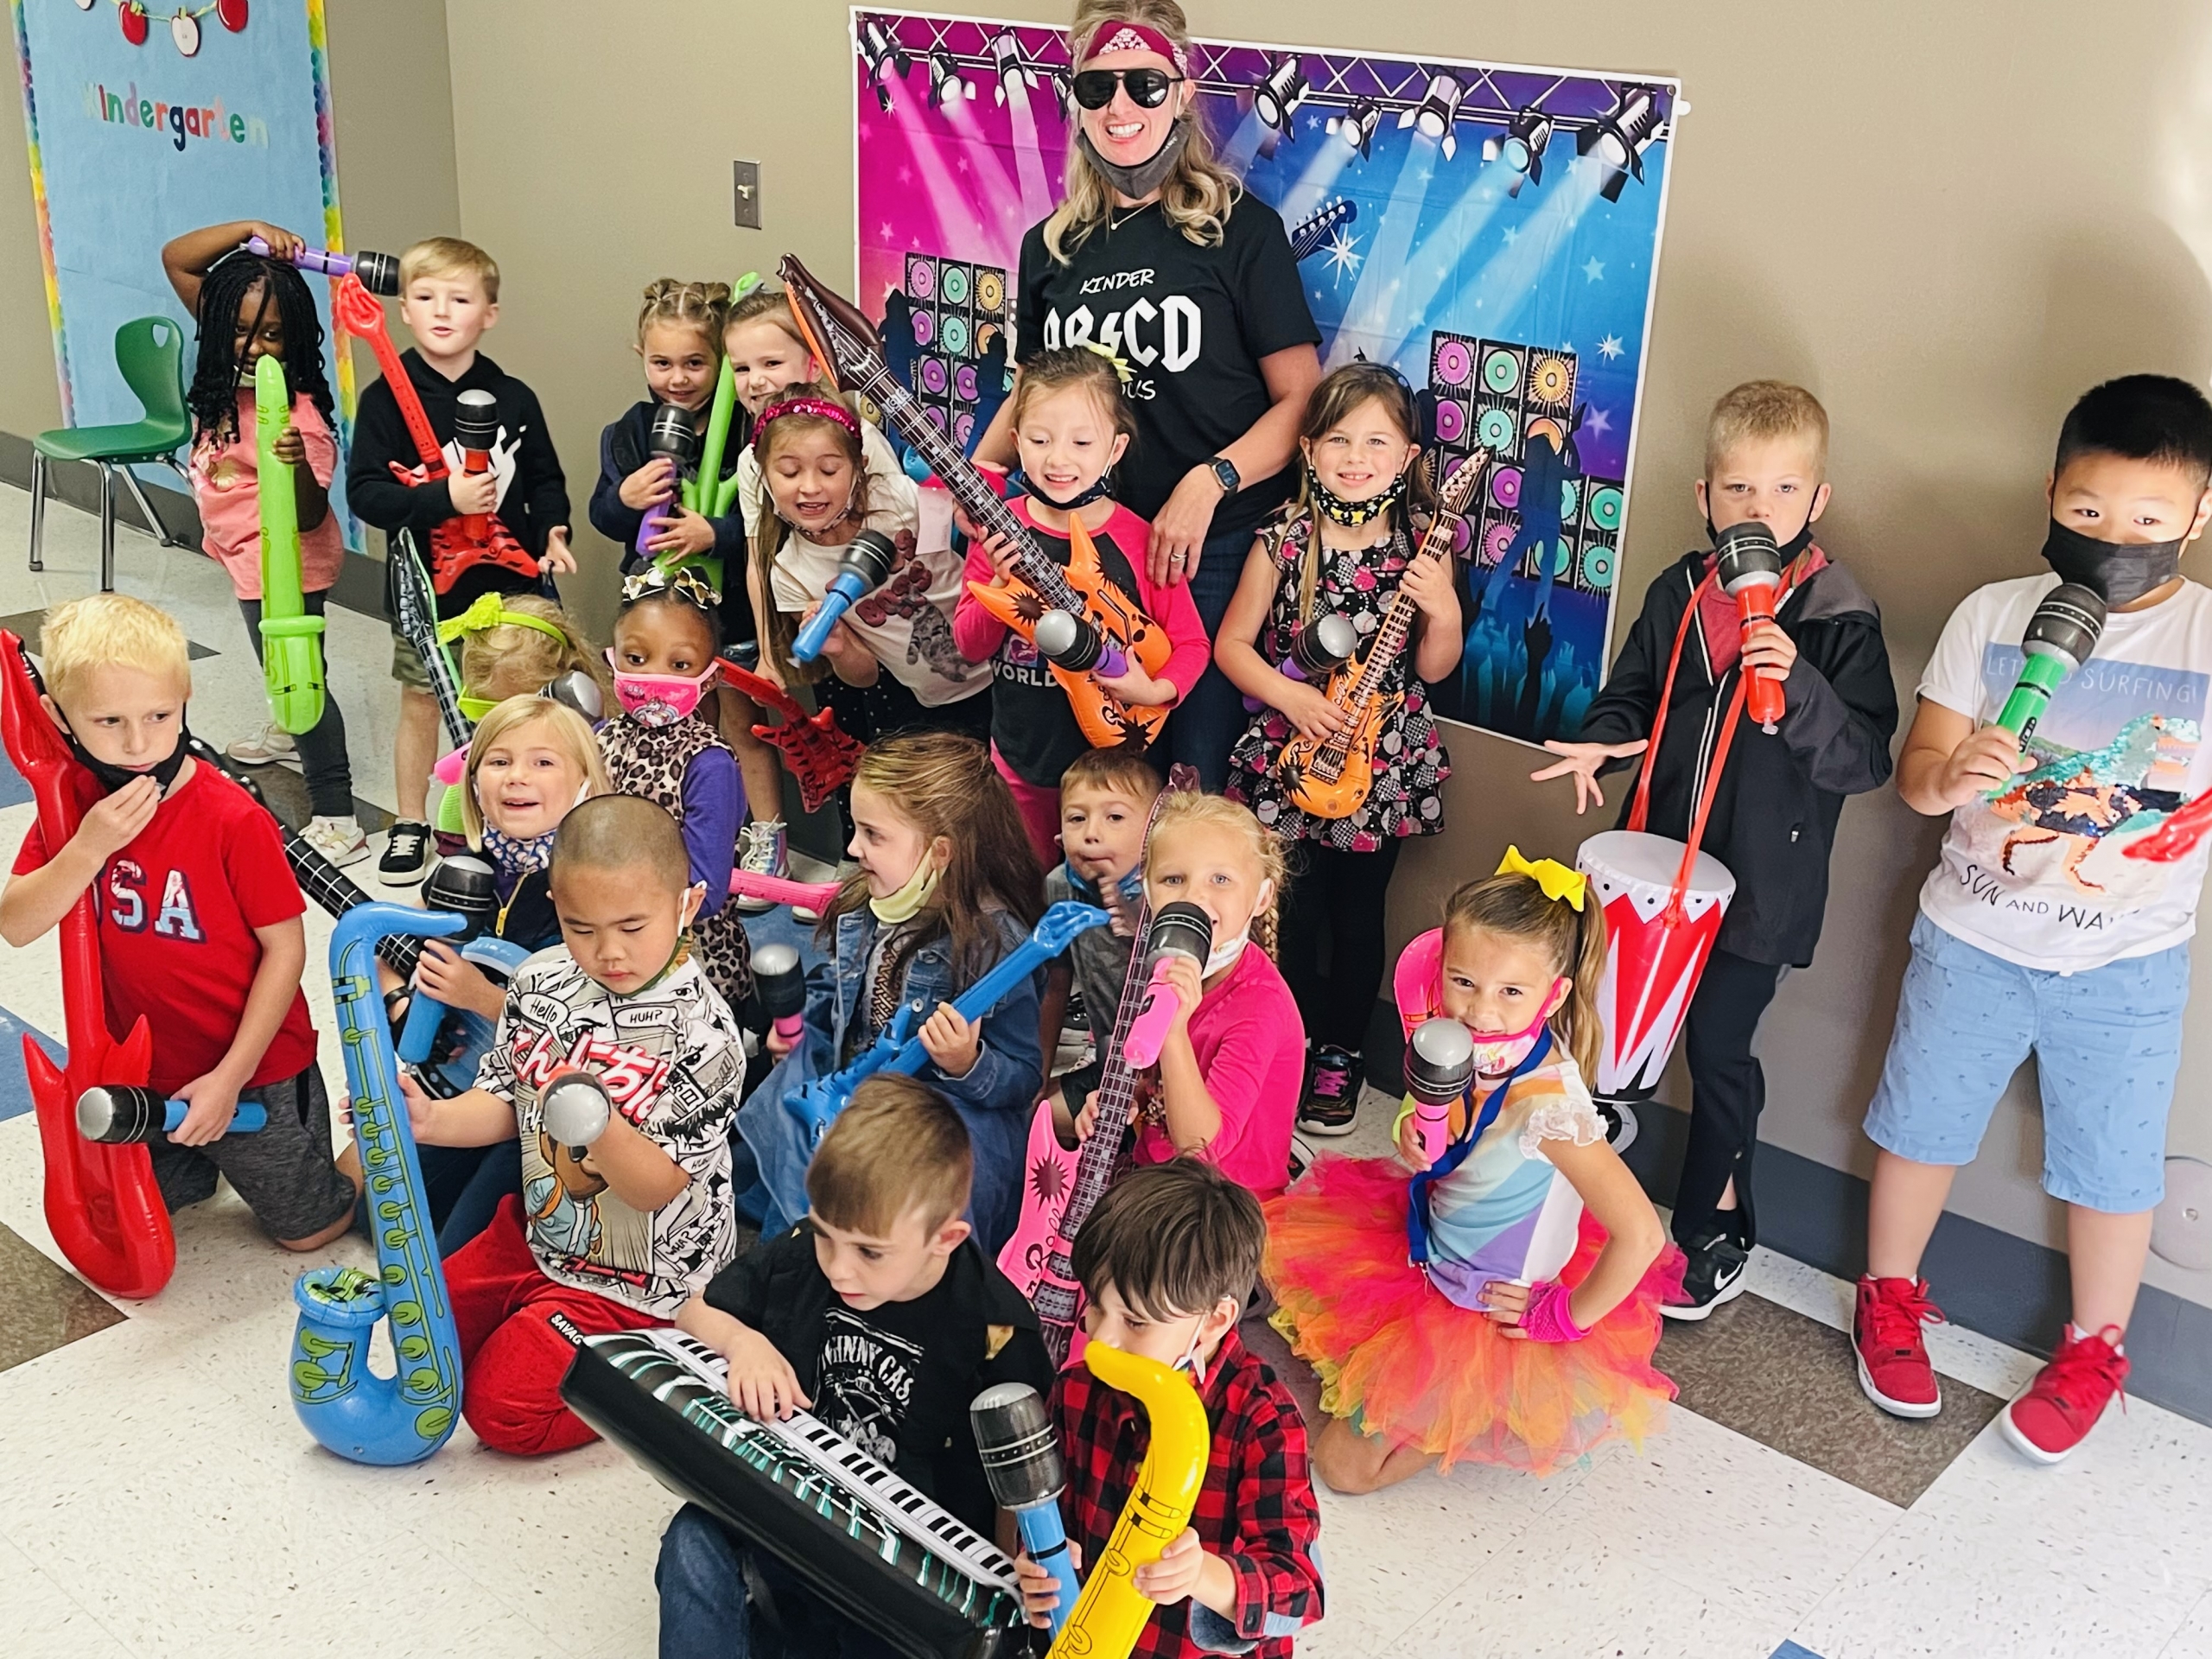 Kolling students complete 844 acts of kindness and raise over $23,000 throughout their community. Classes celebrate by Rocking out!